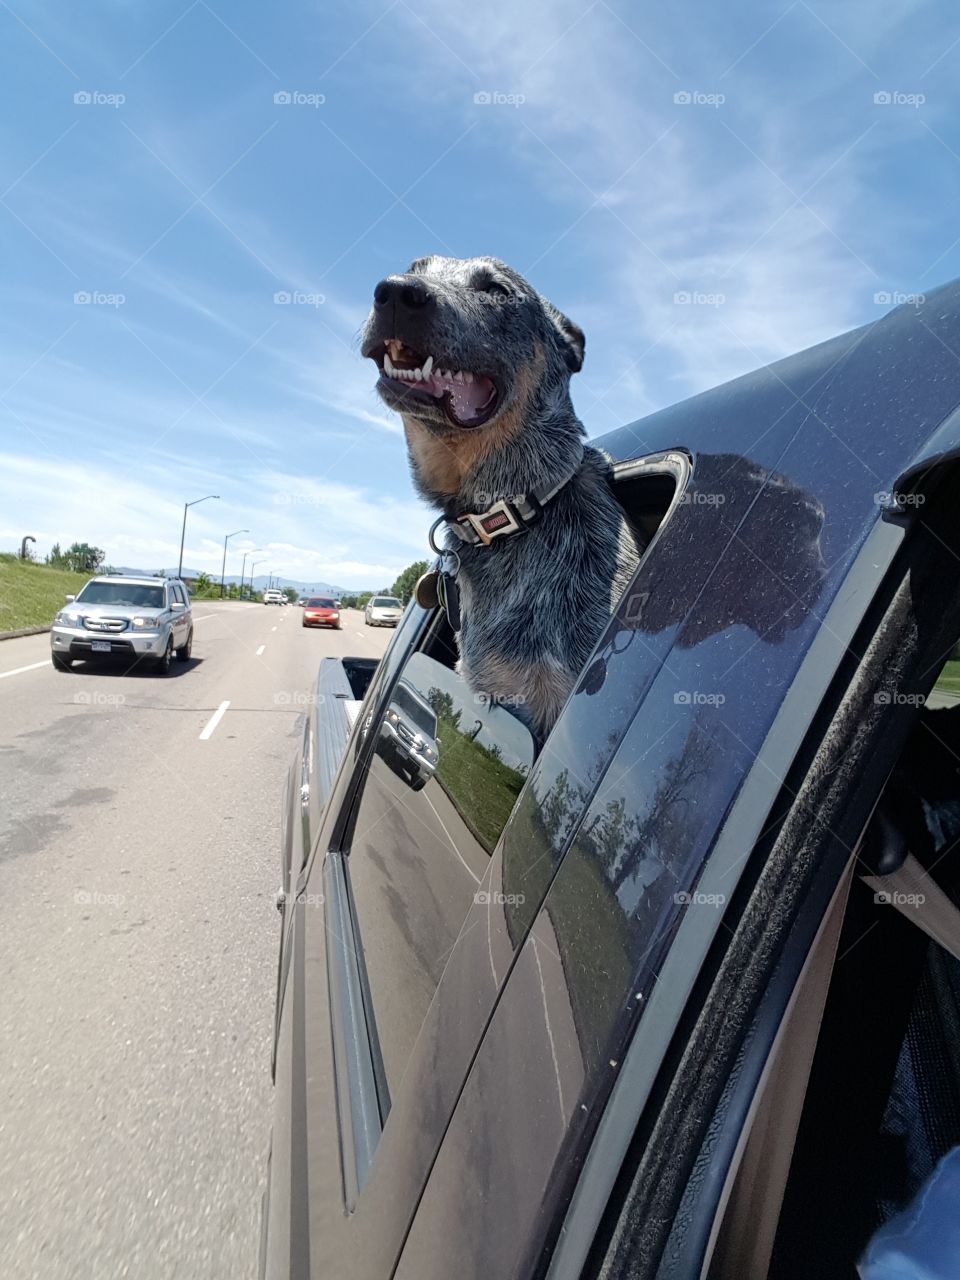 Whisky riding in the truck